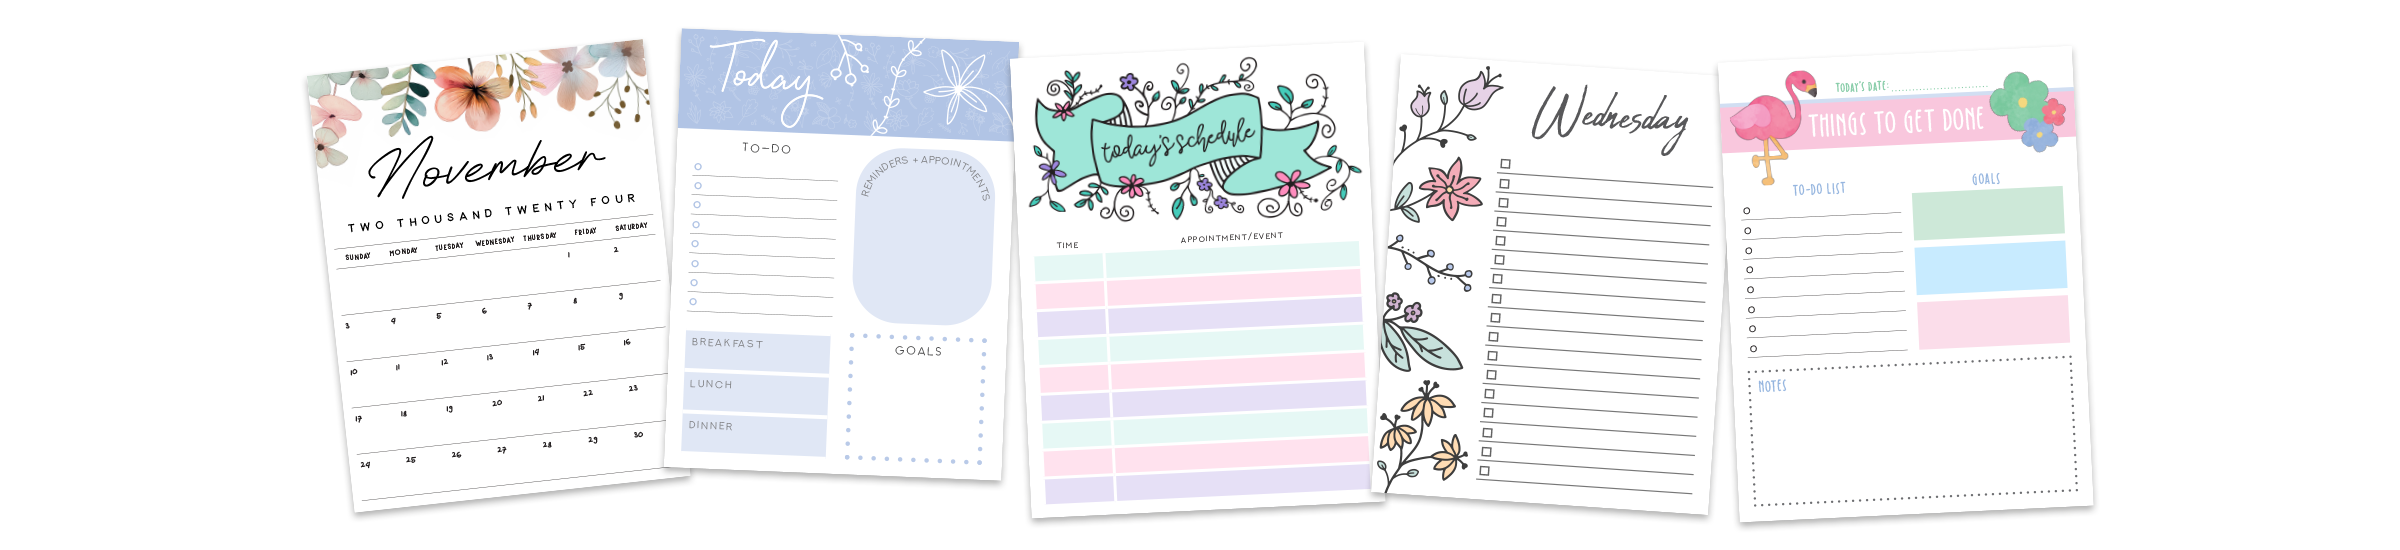 Tidy Plans Printable Planners